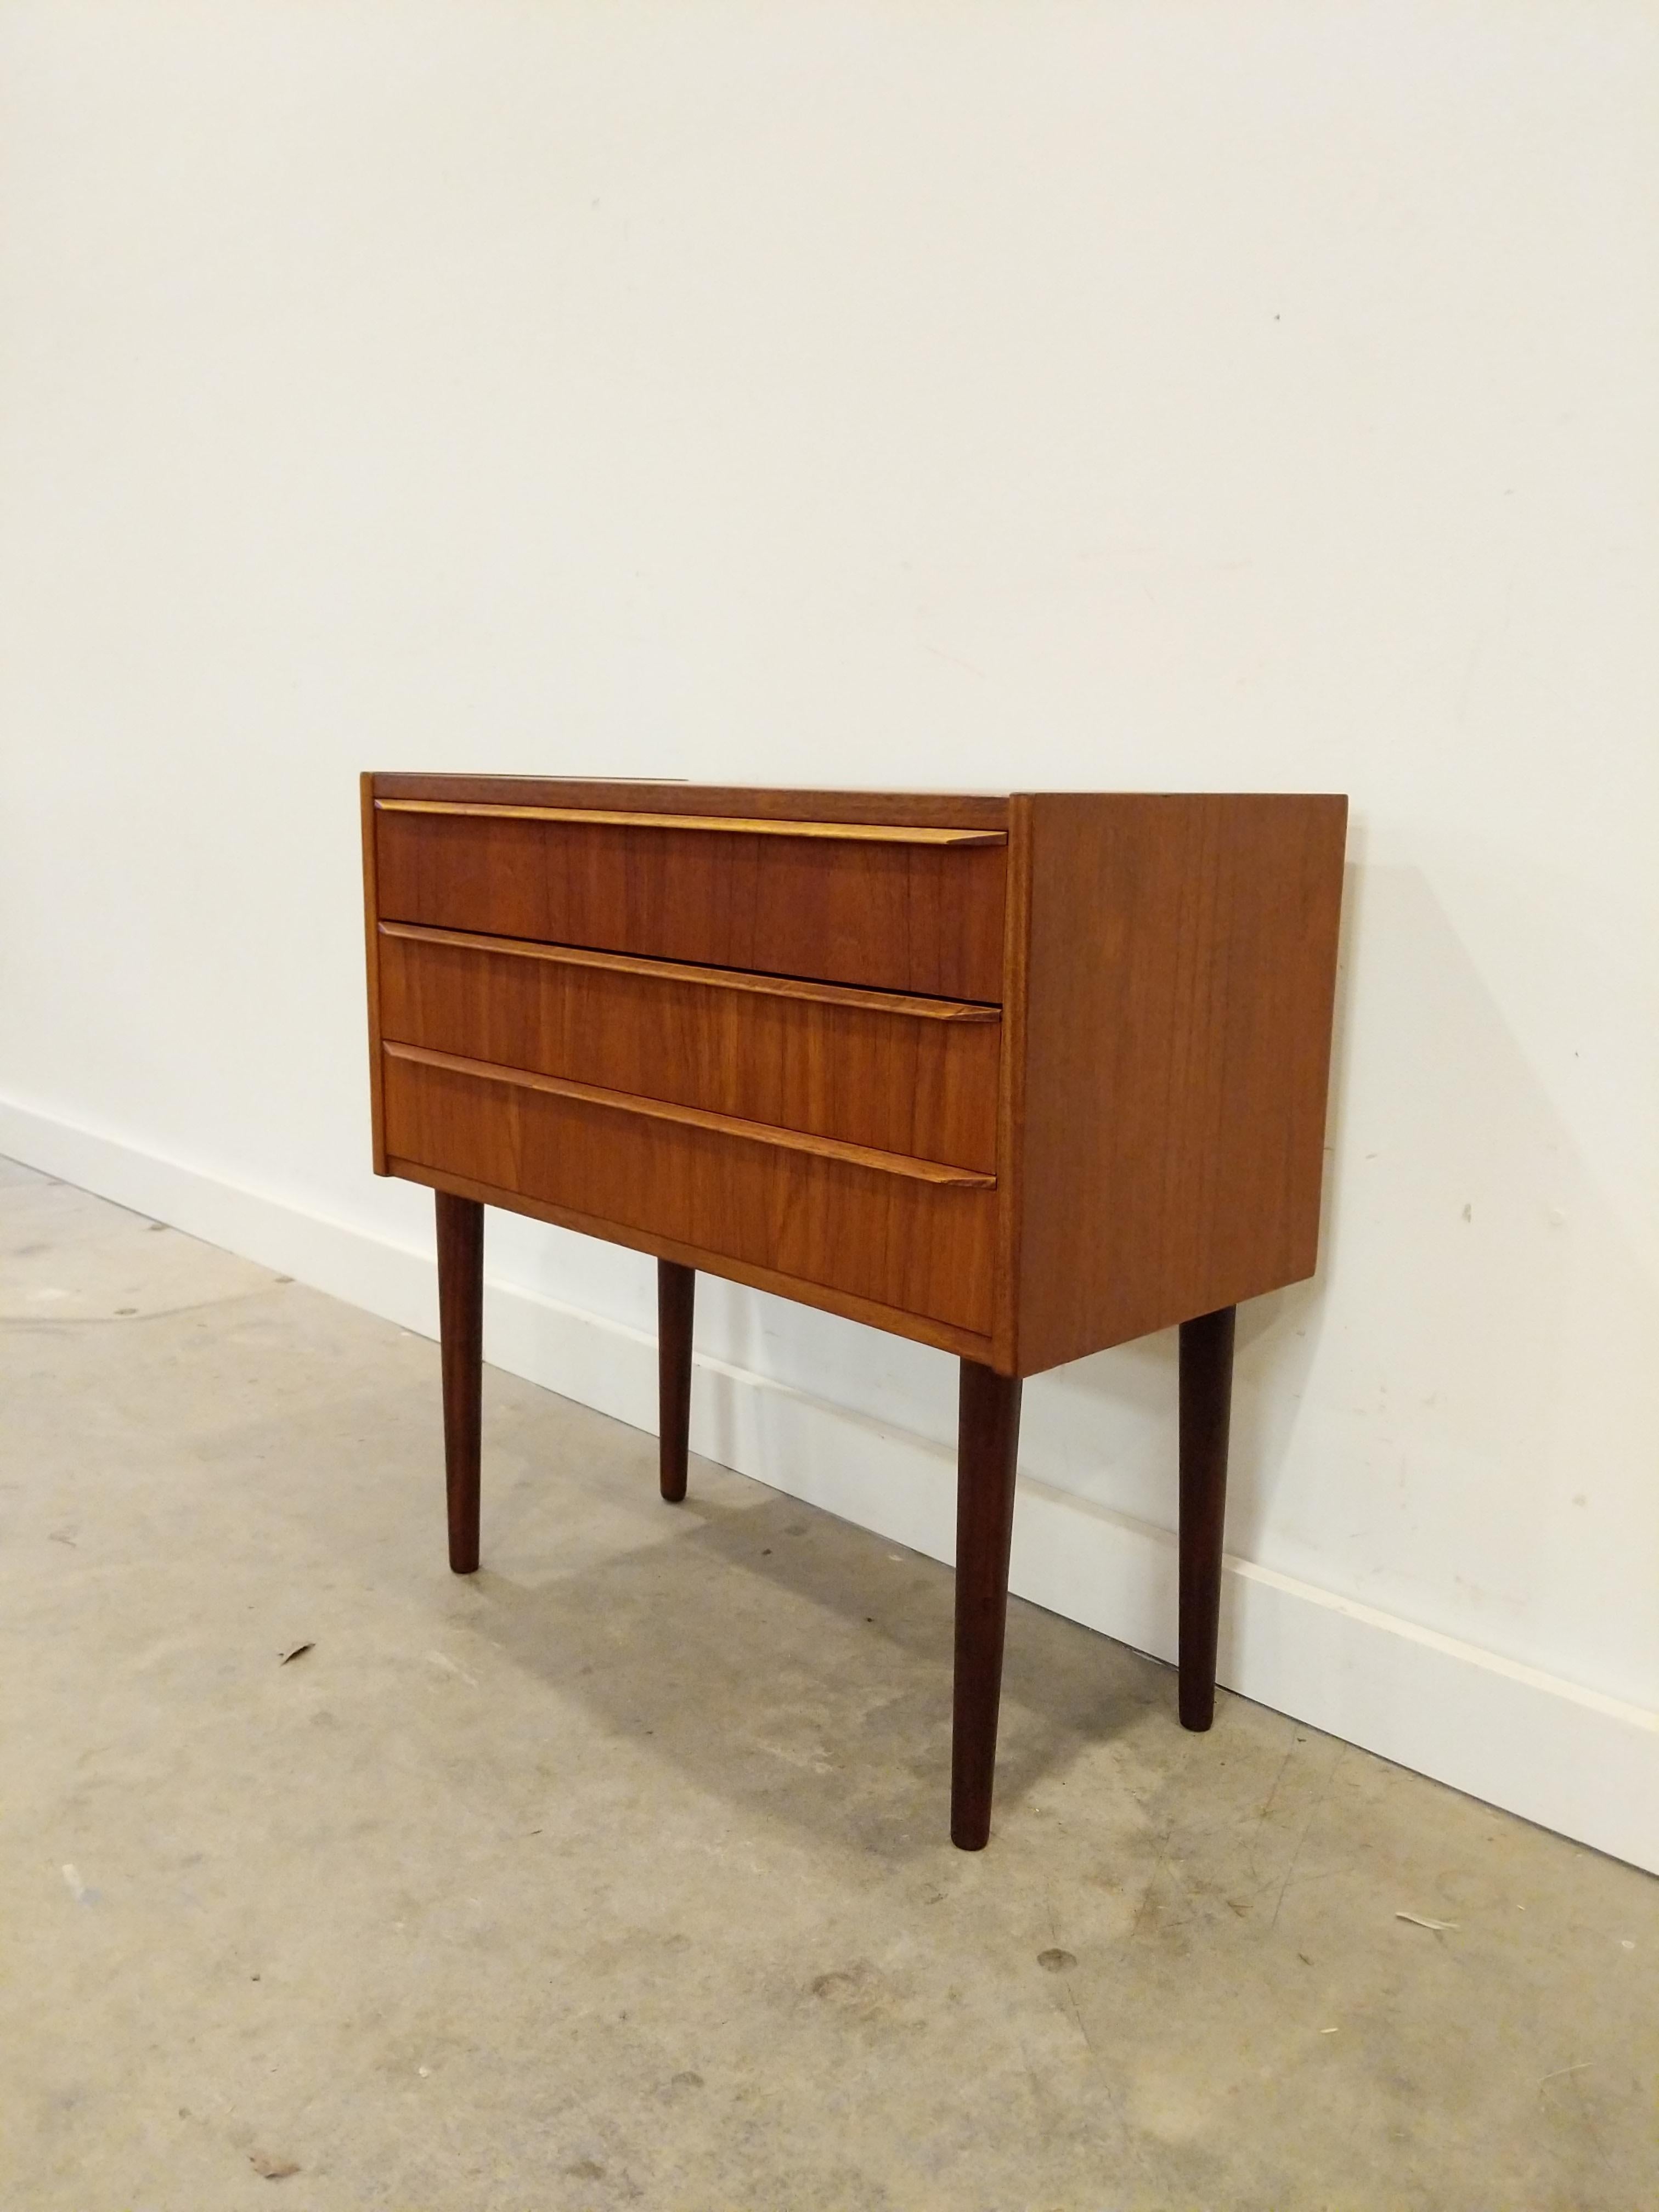 Authentic vintage mid century Danish / Scandinavian Modern teak nightstand / low chest of drawers.

Imported directly from Denmark, this piece is in excellent refinished condition with very few signs of age-appropriate wear (see photos).

If you